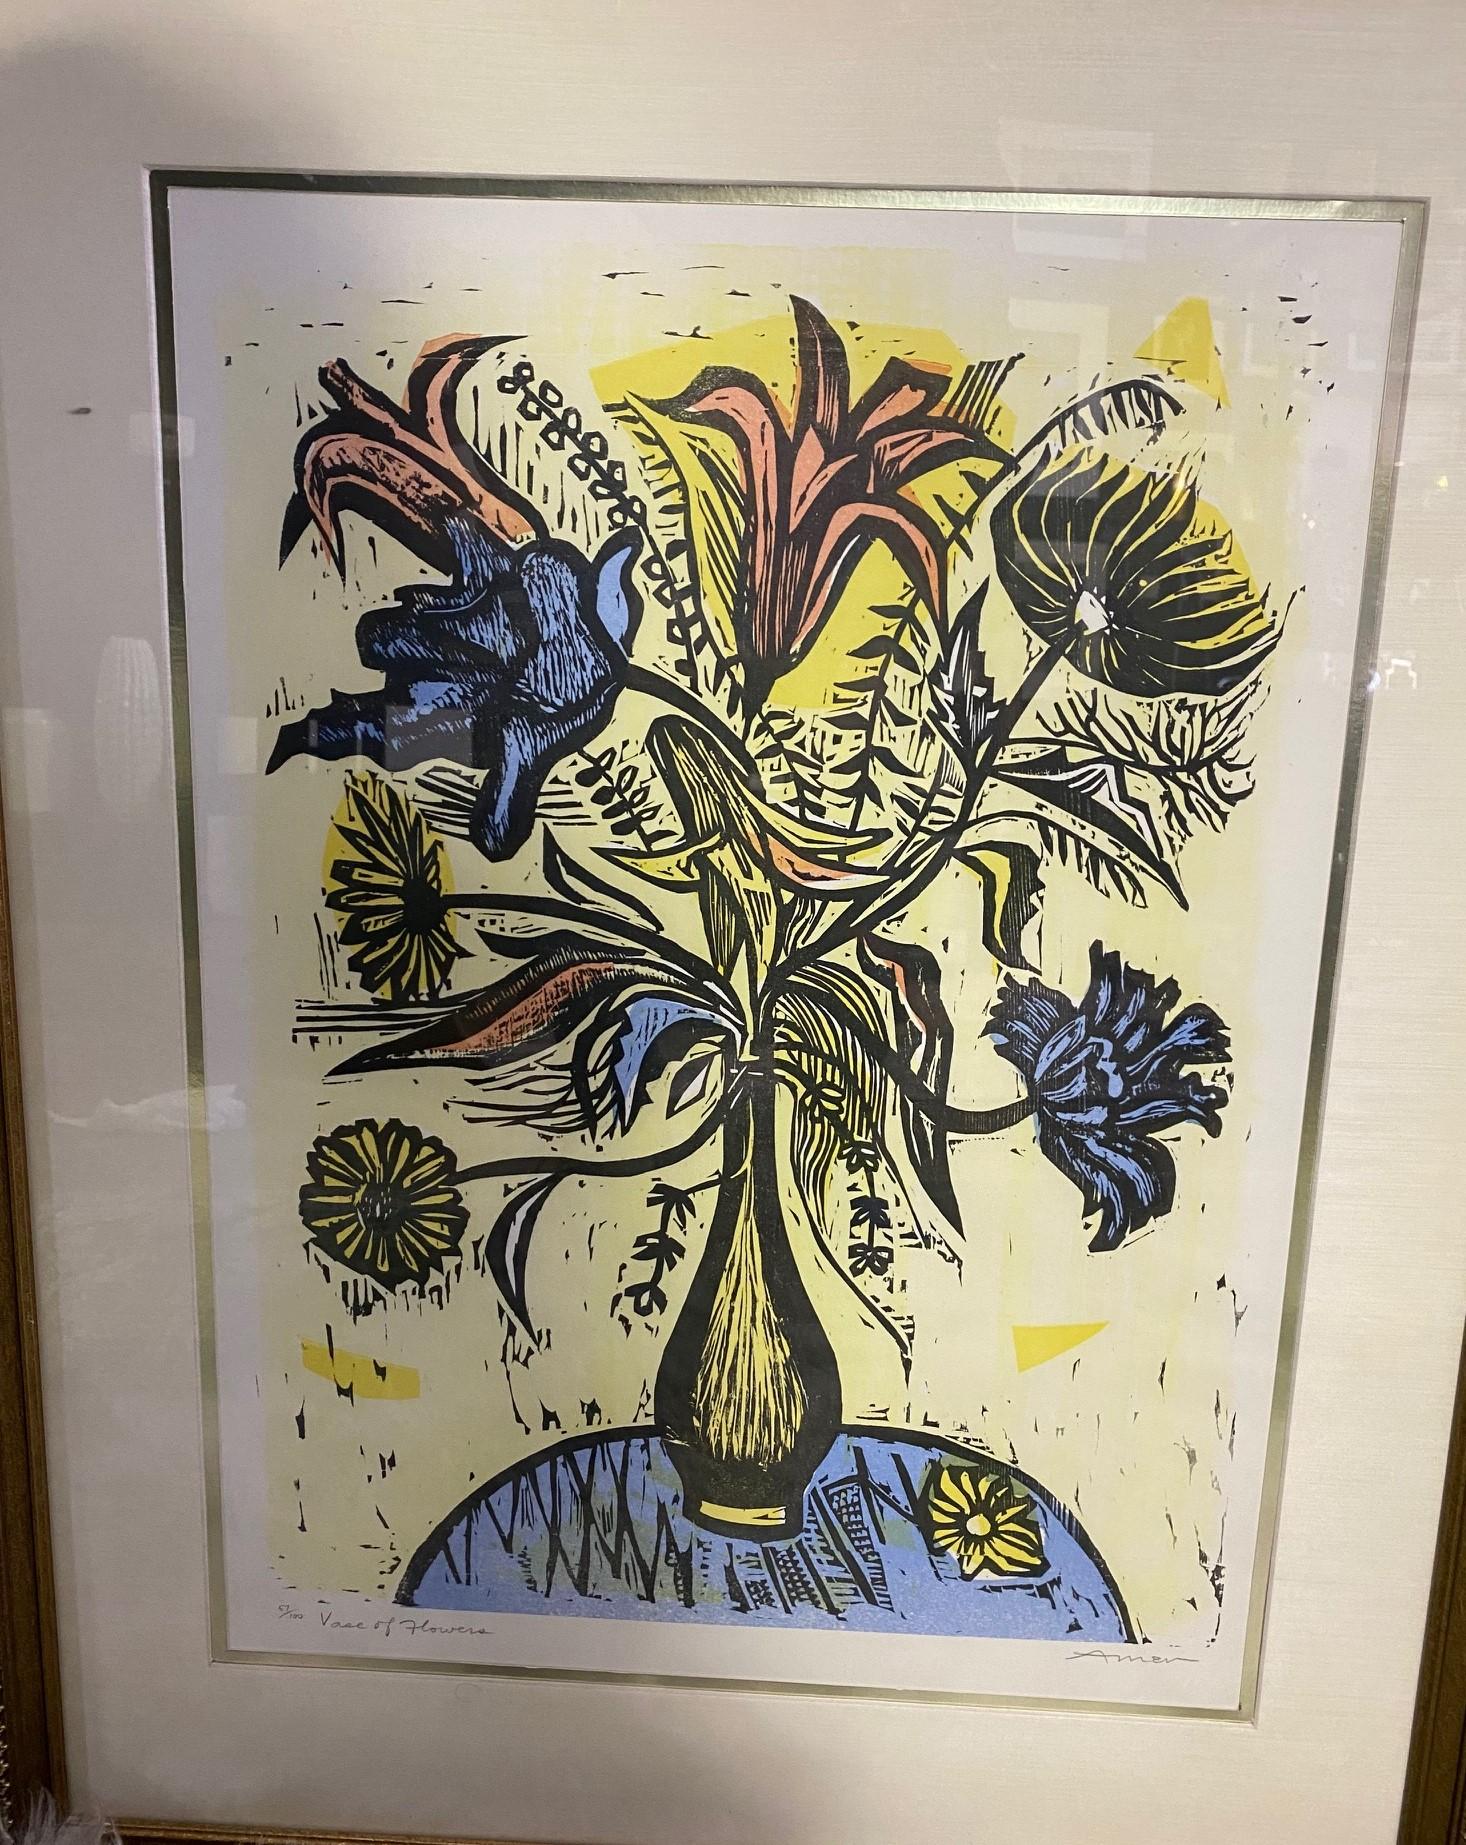 American Irving Amen Signed Mid-Century Modern Limited Edition Woodcut Print Vase Flowers